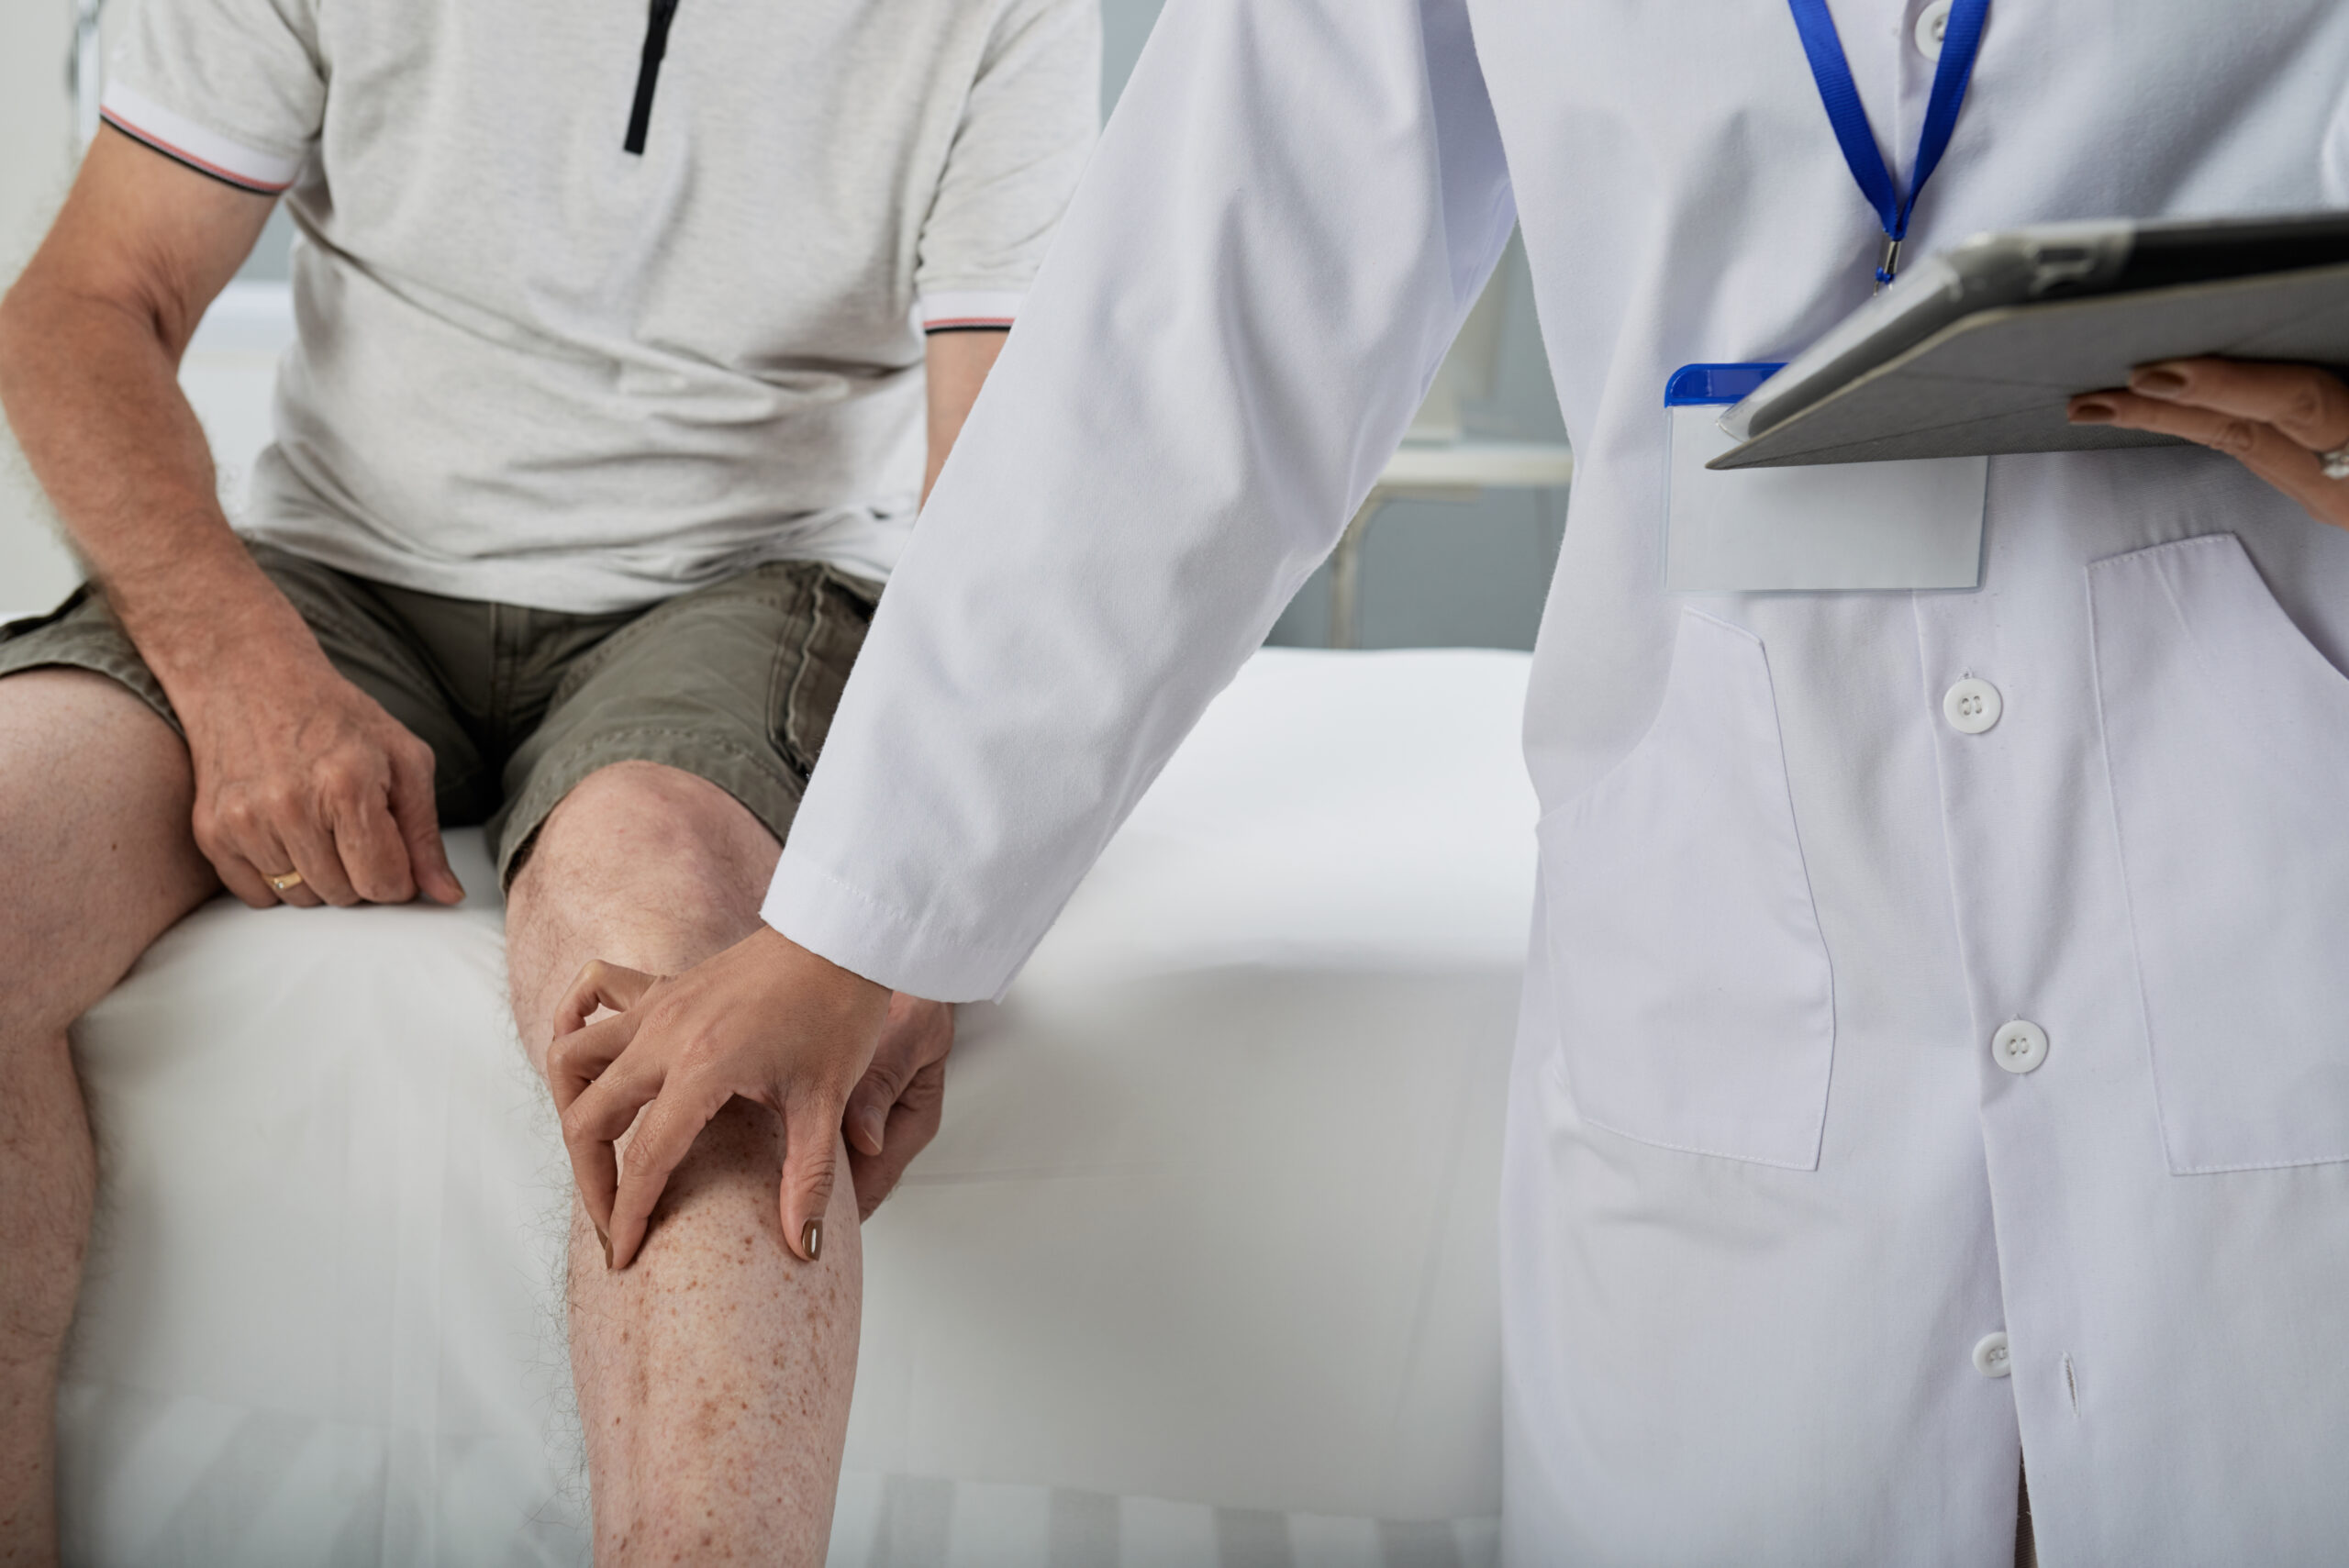 What Are The Different Types of Robotic Knee Replacement?